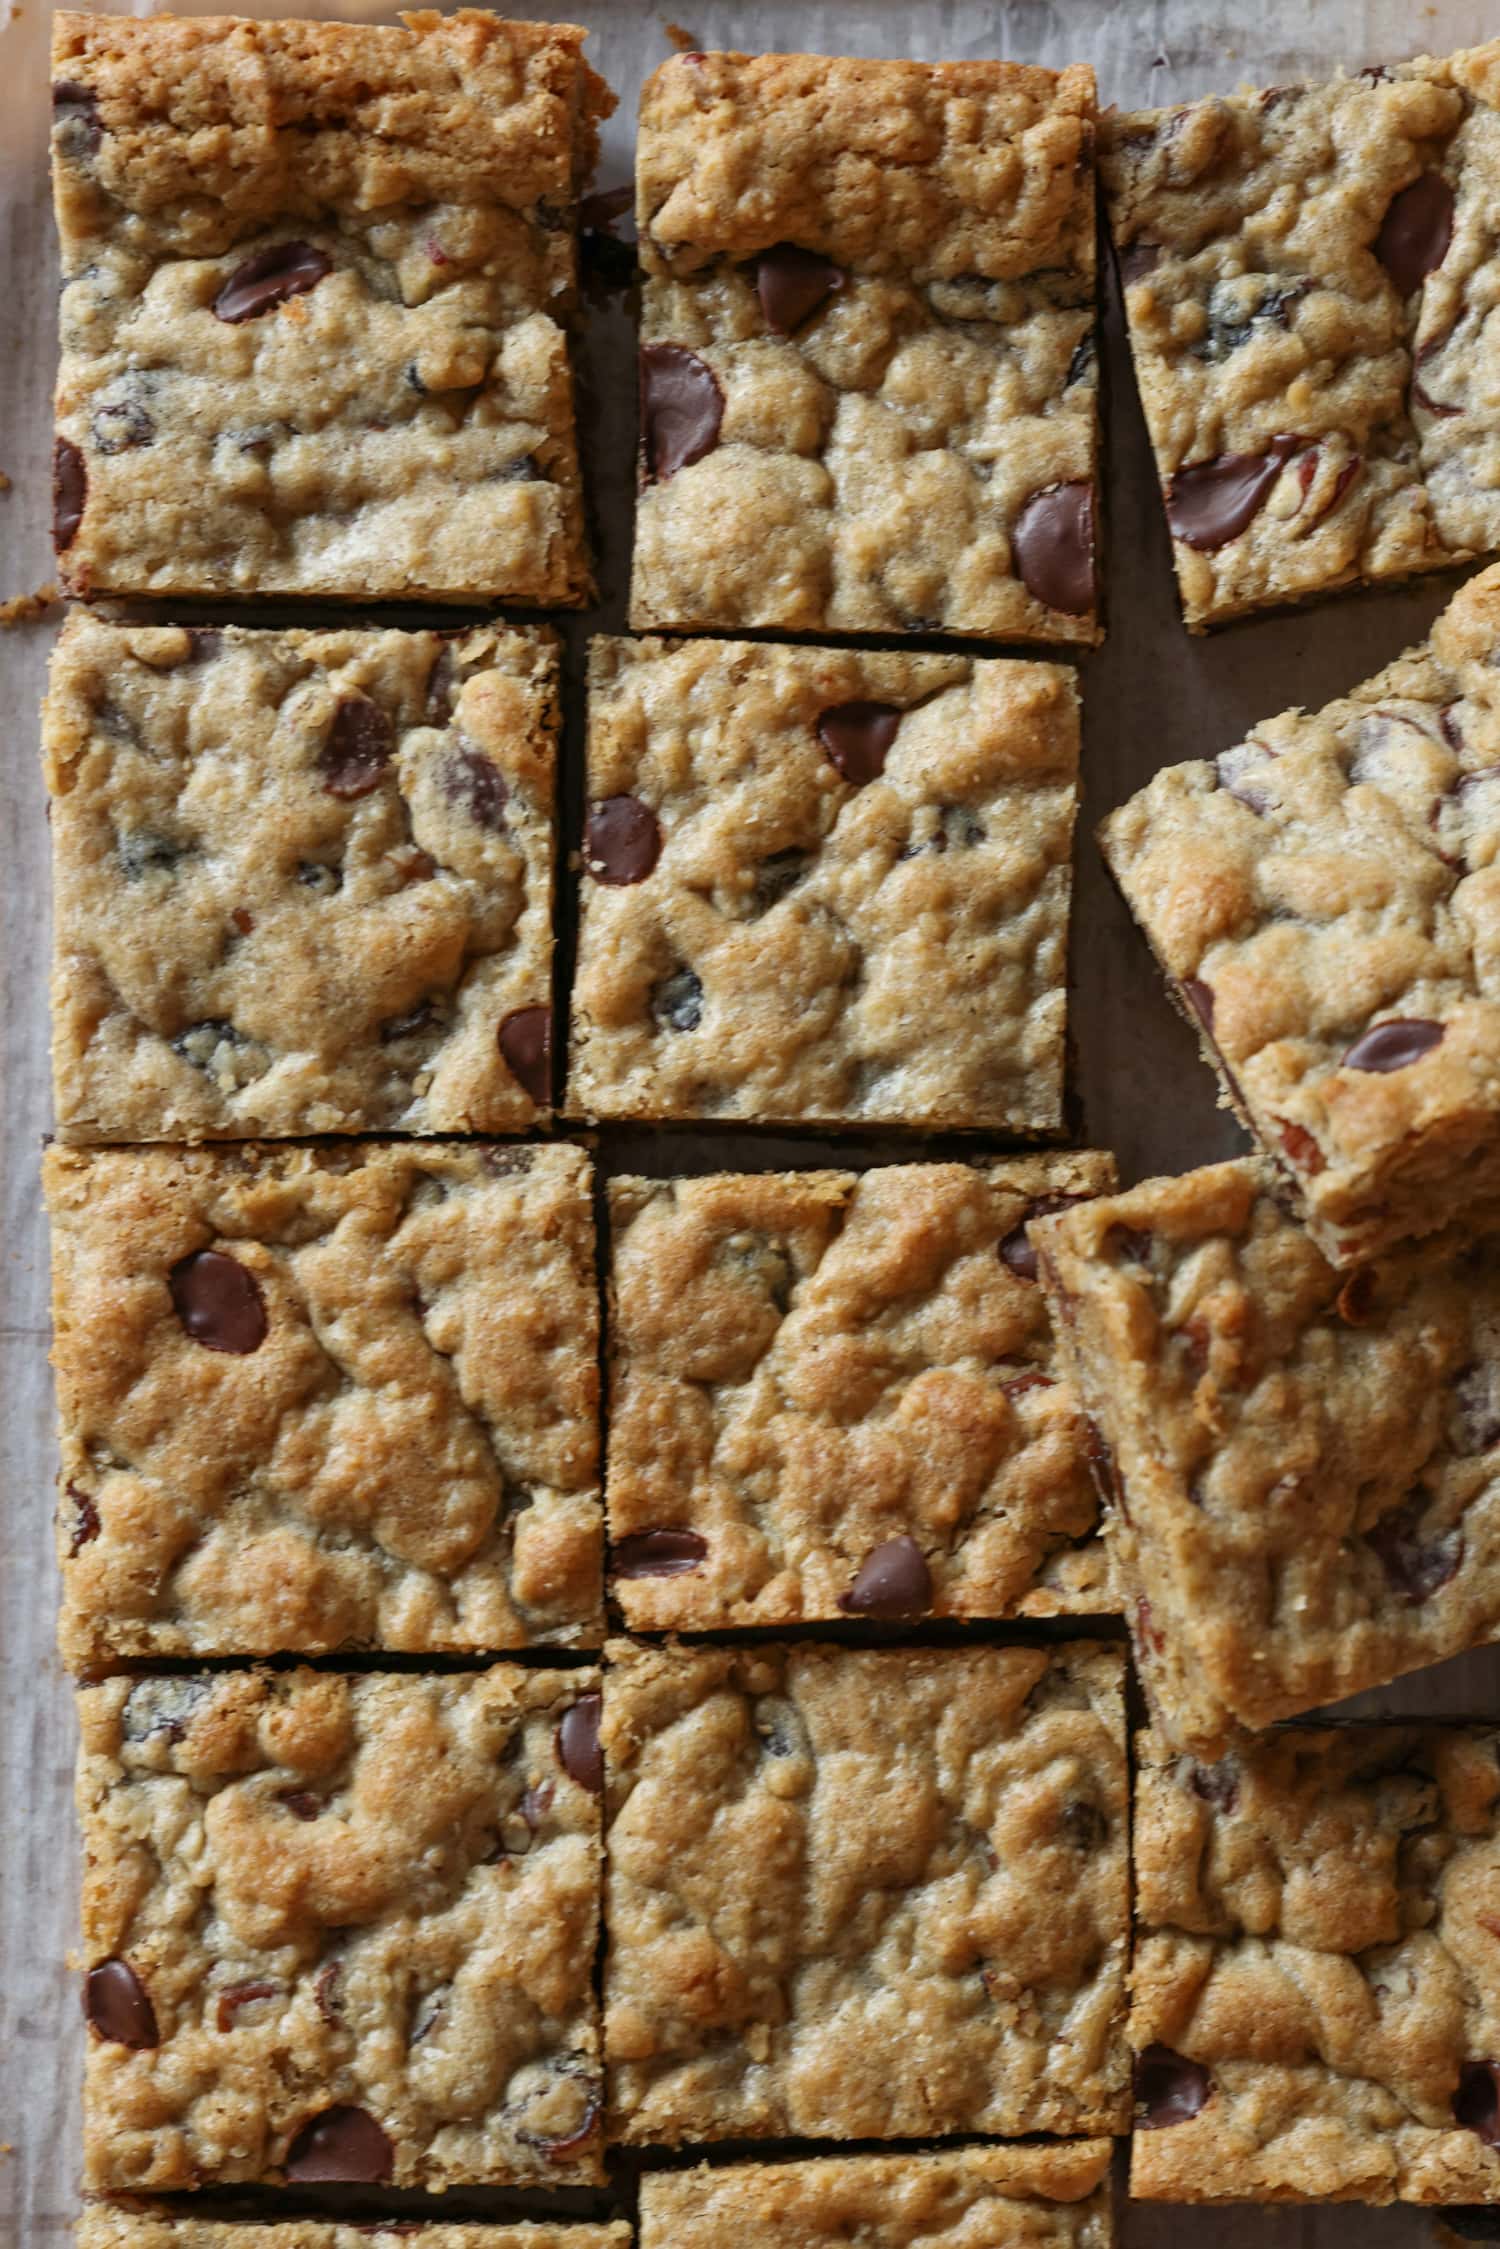 Oatmeal Cookie bars cut from above